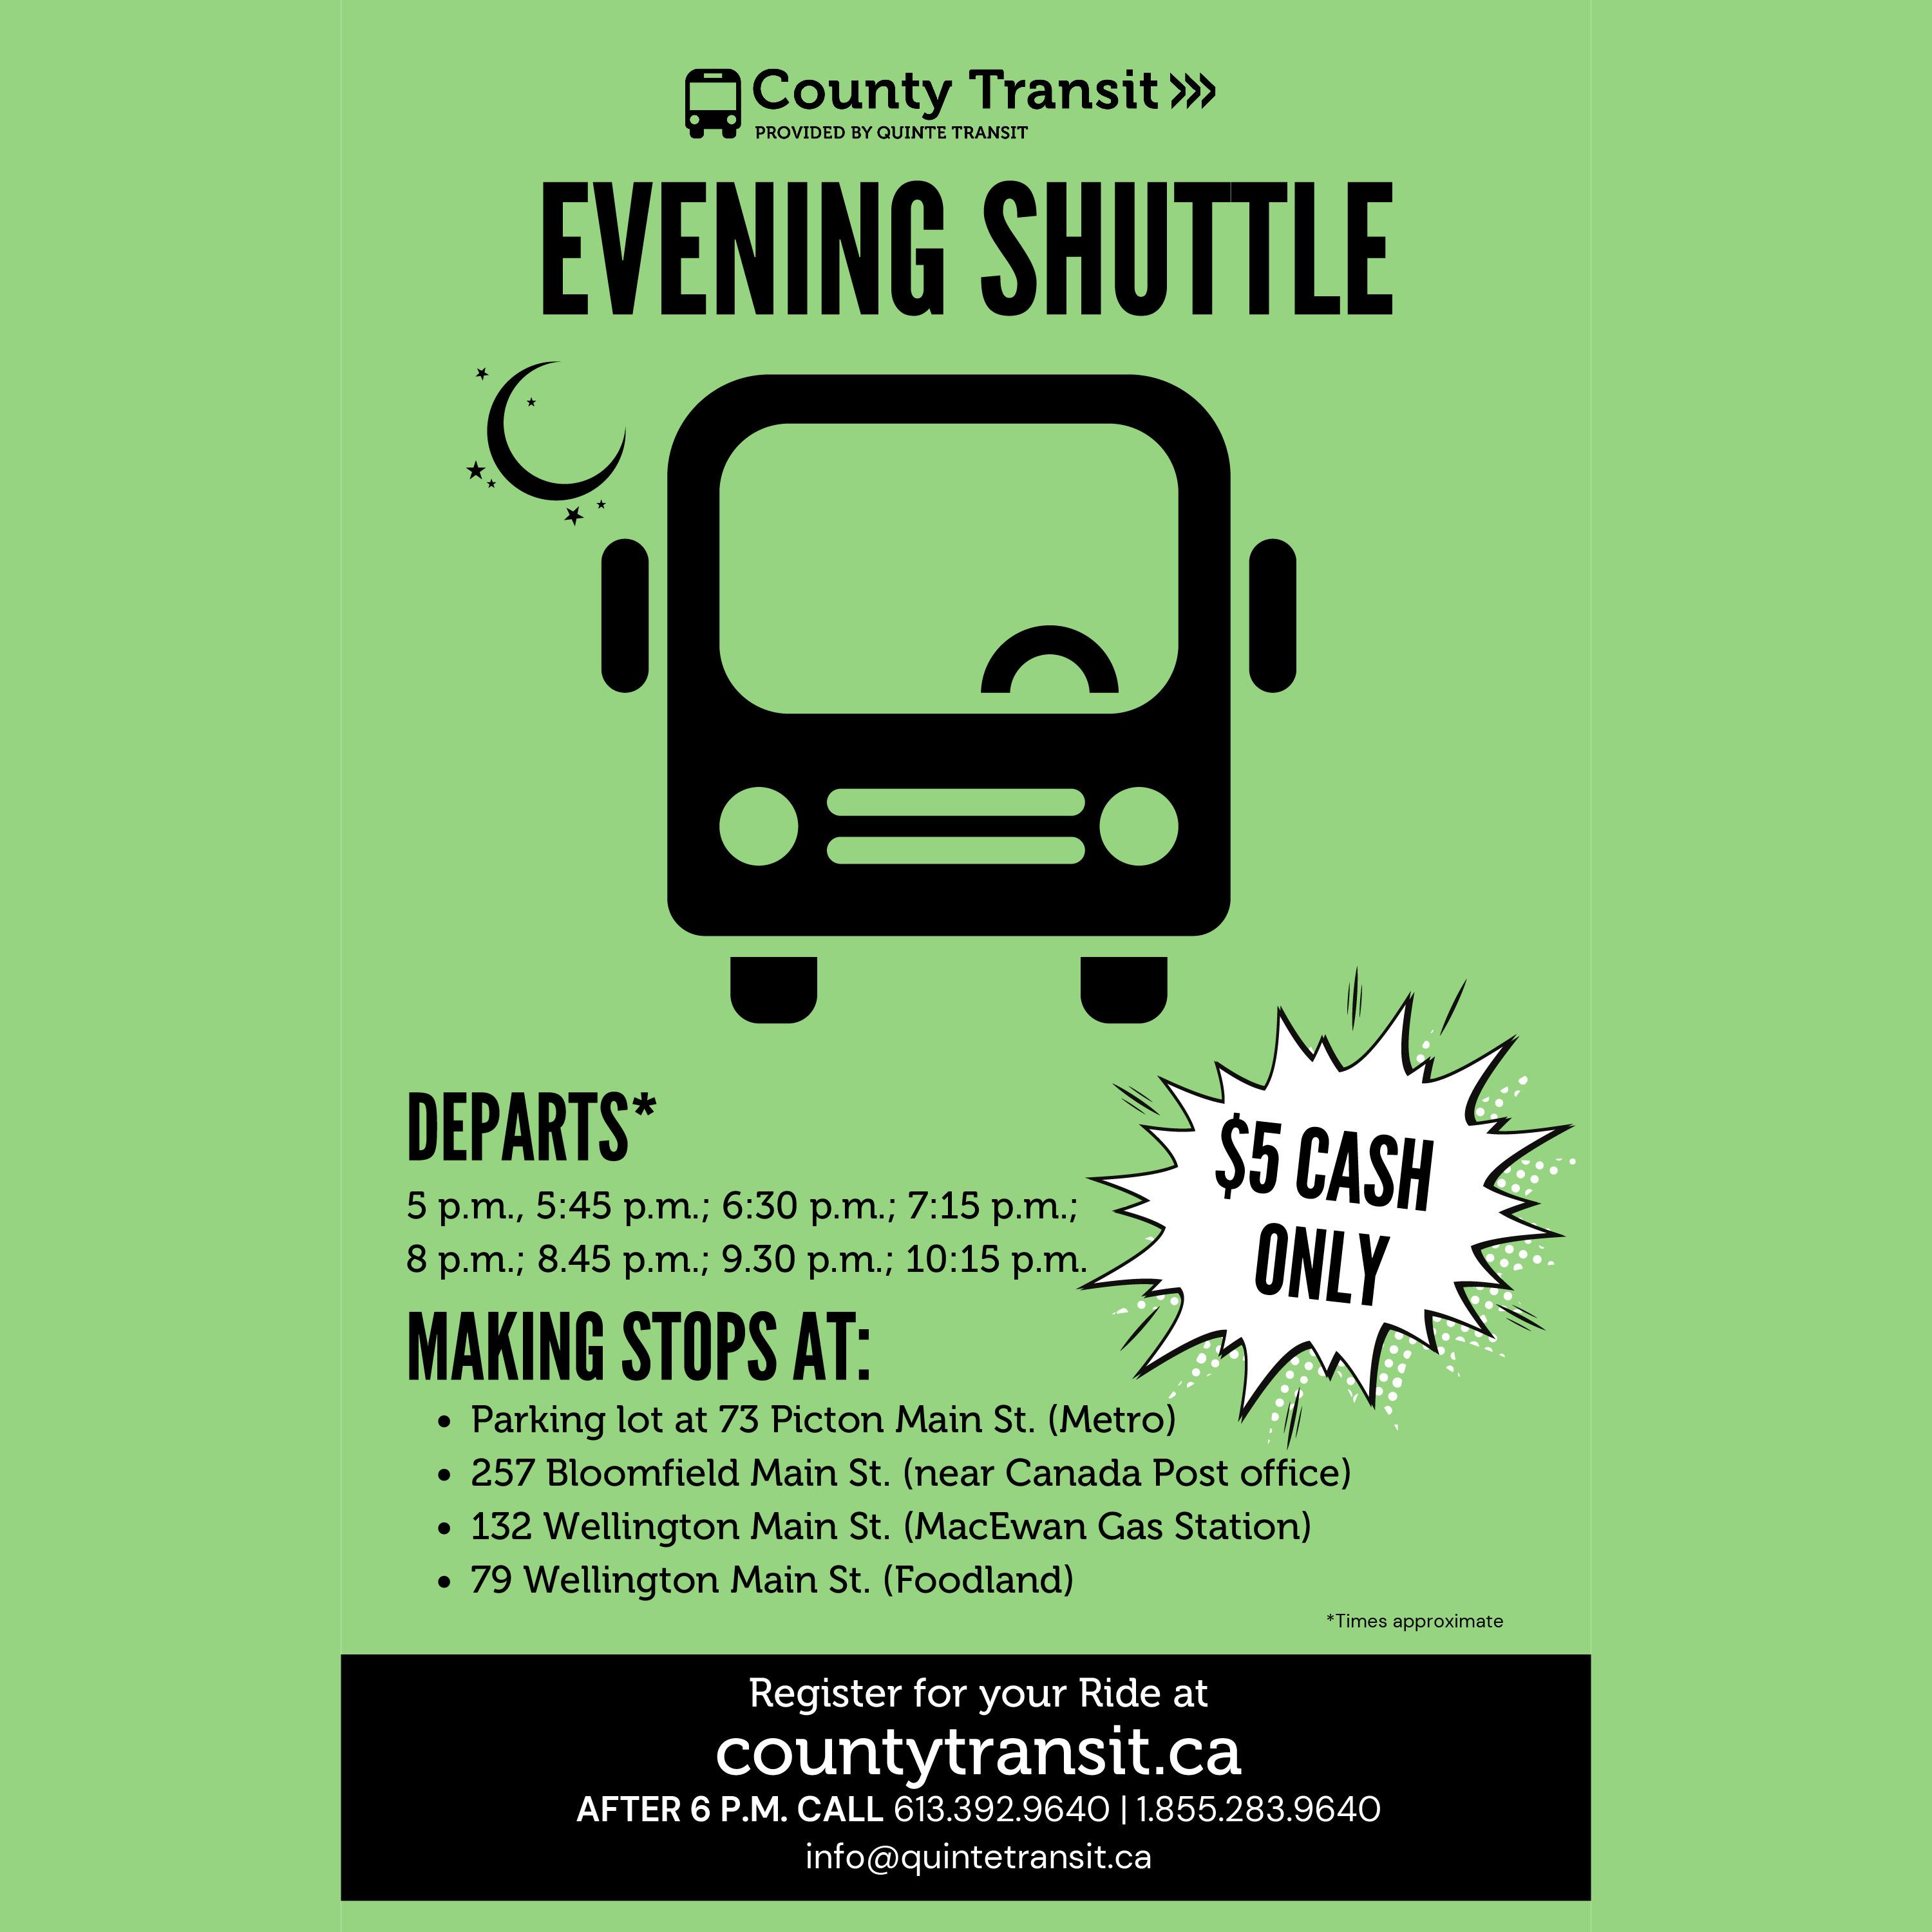 The County Shuttle